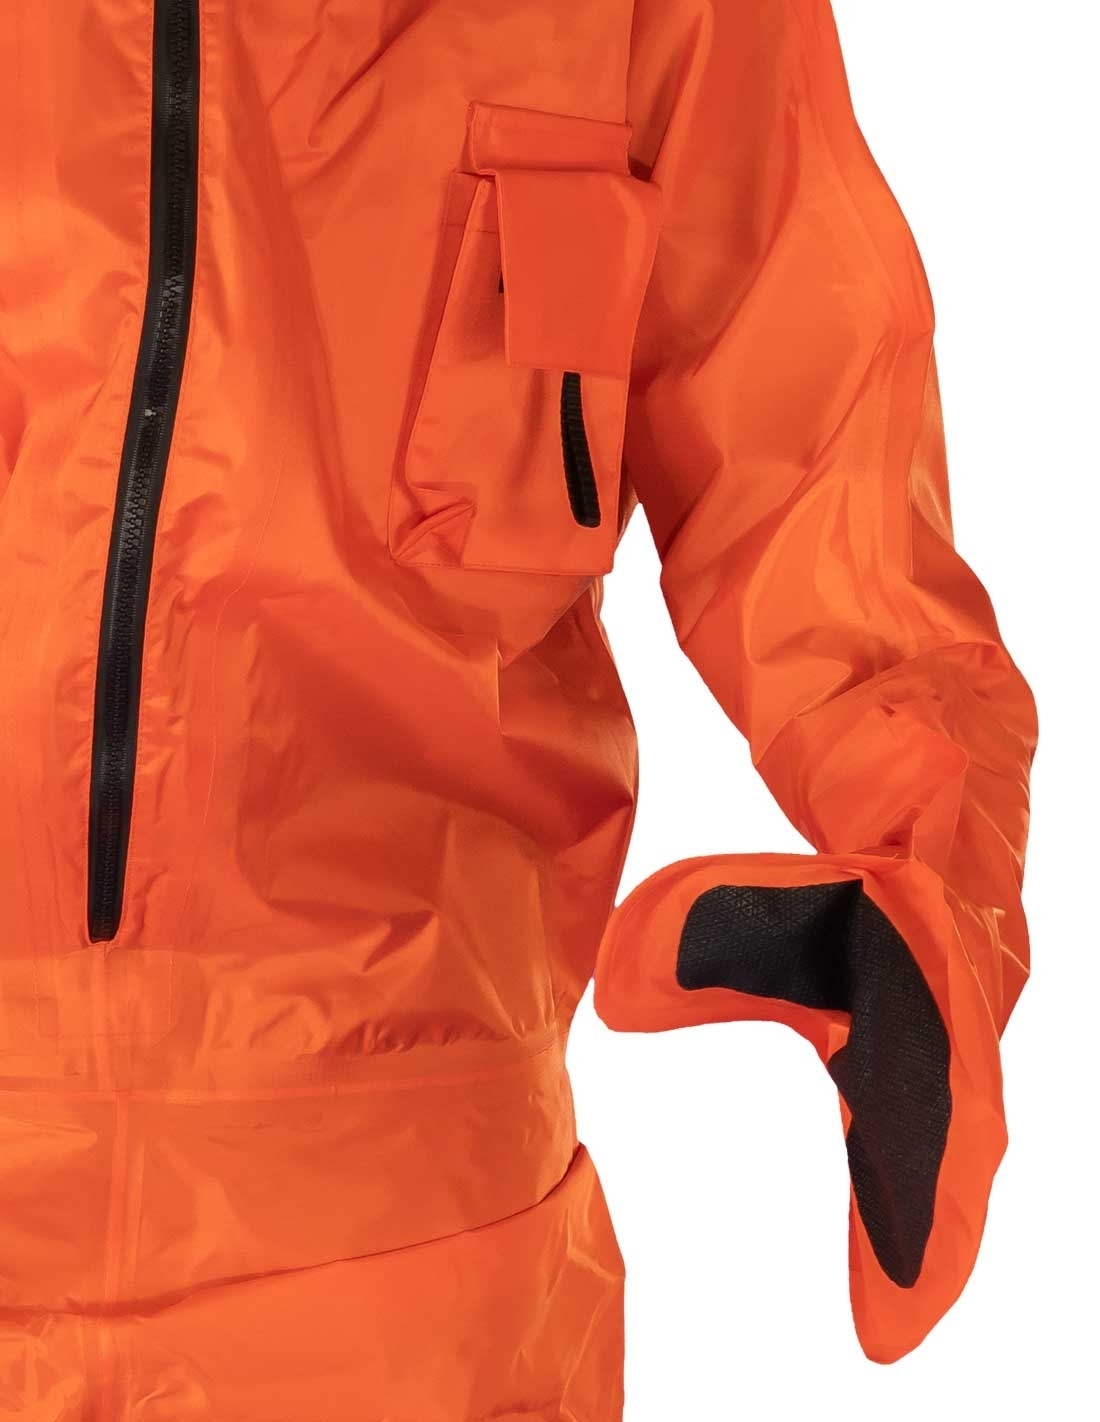 Polar Suit, lightweight protection in demanding expeditions